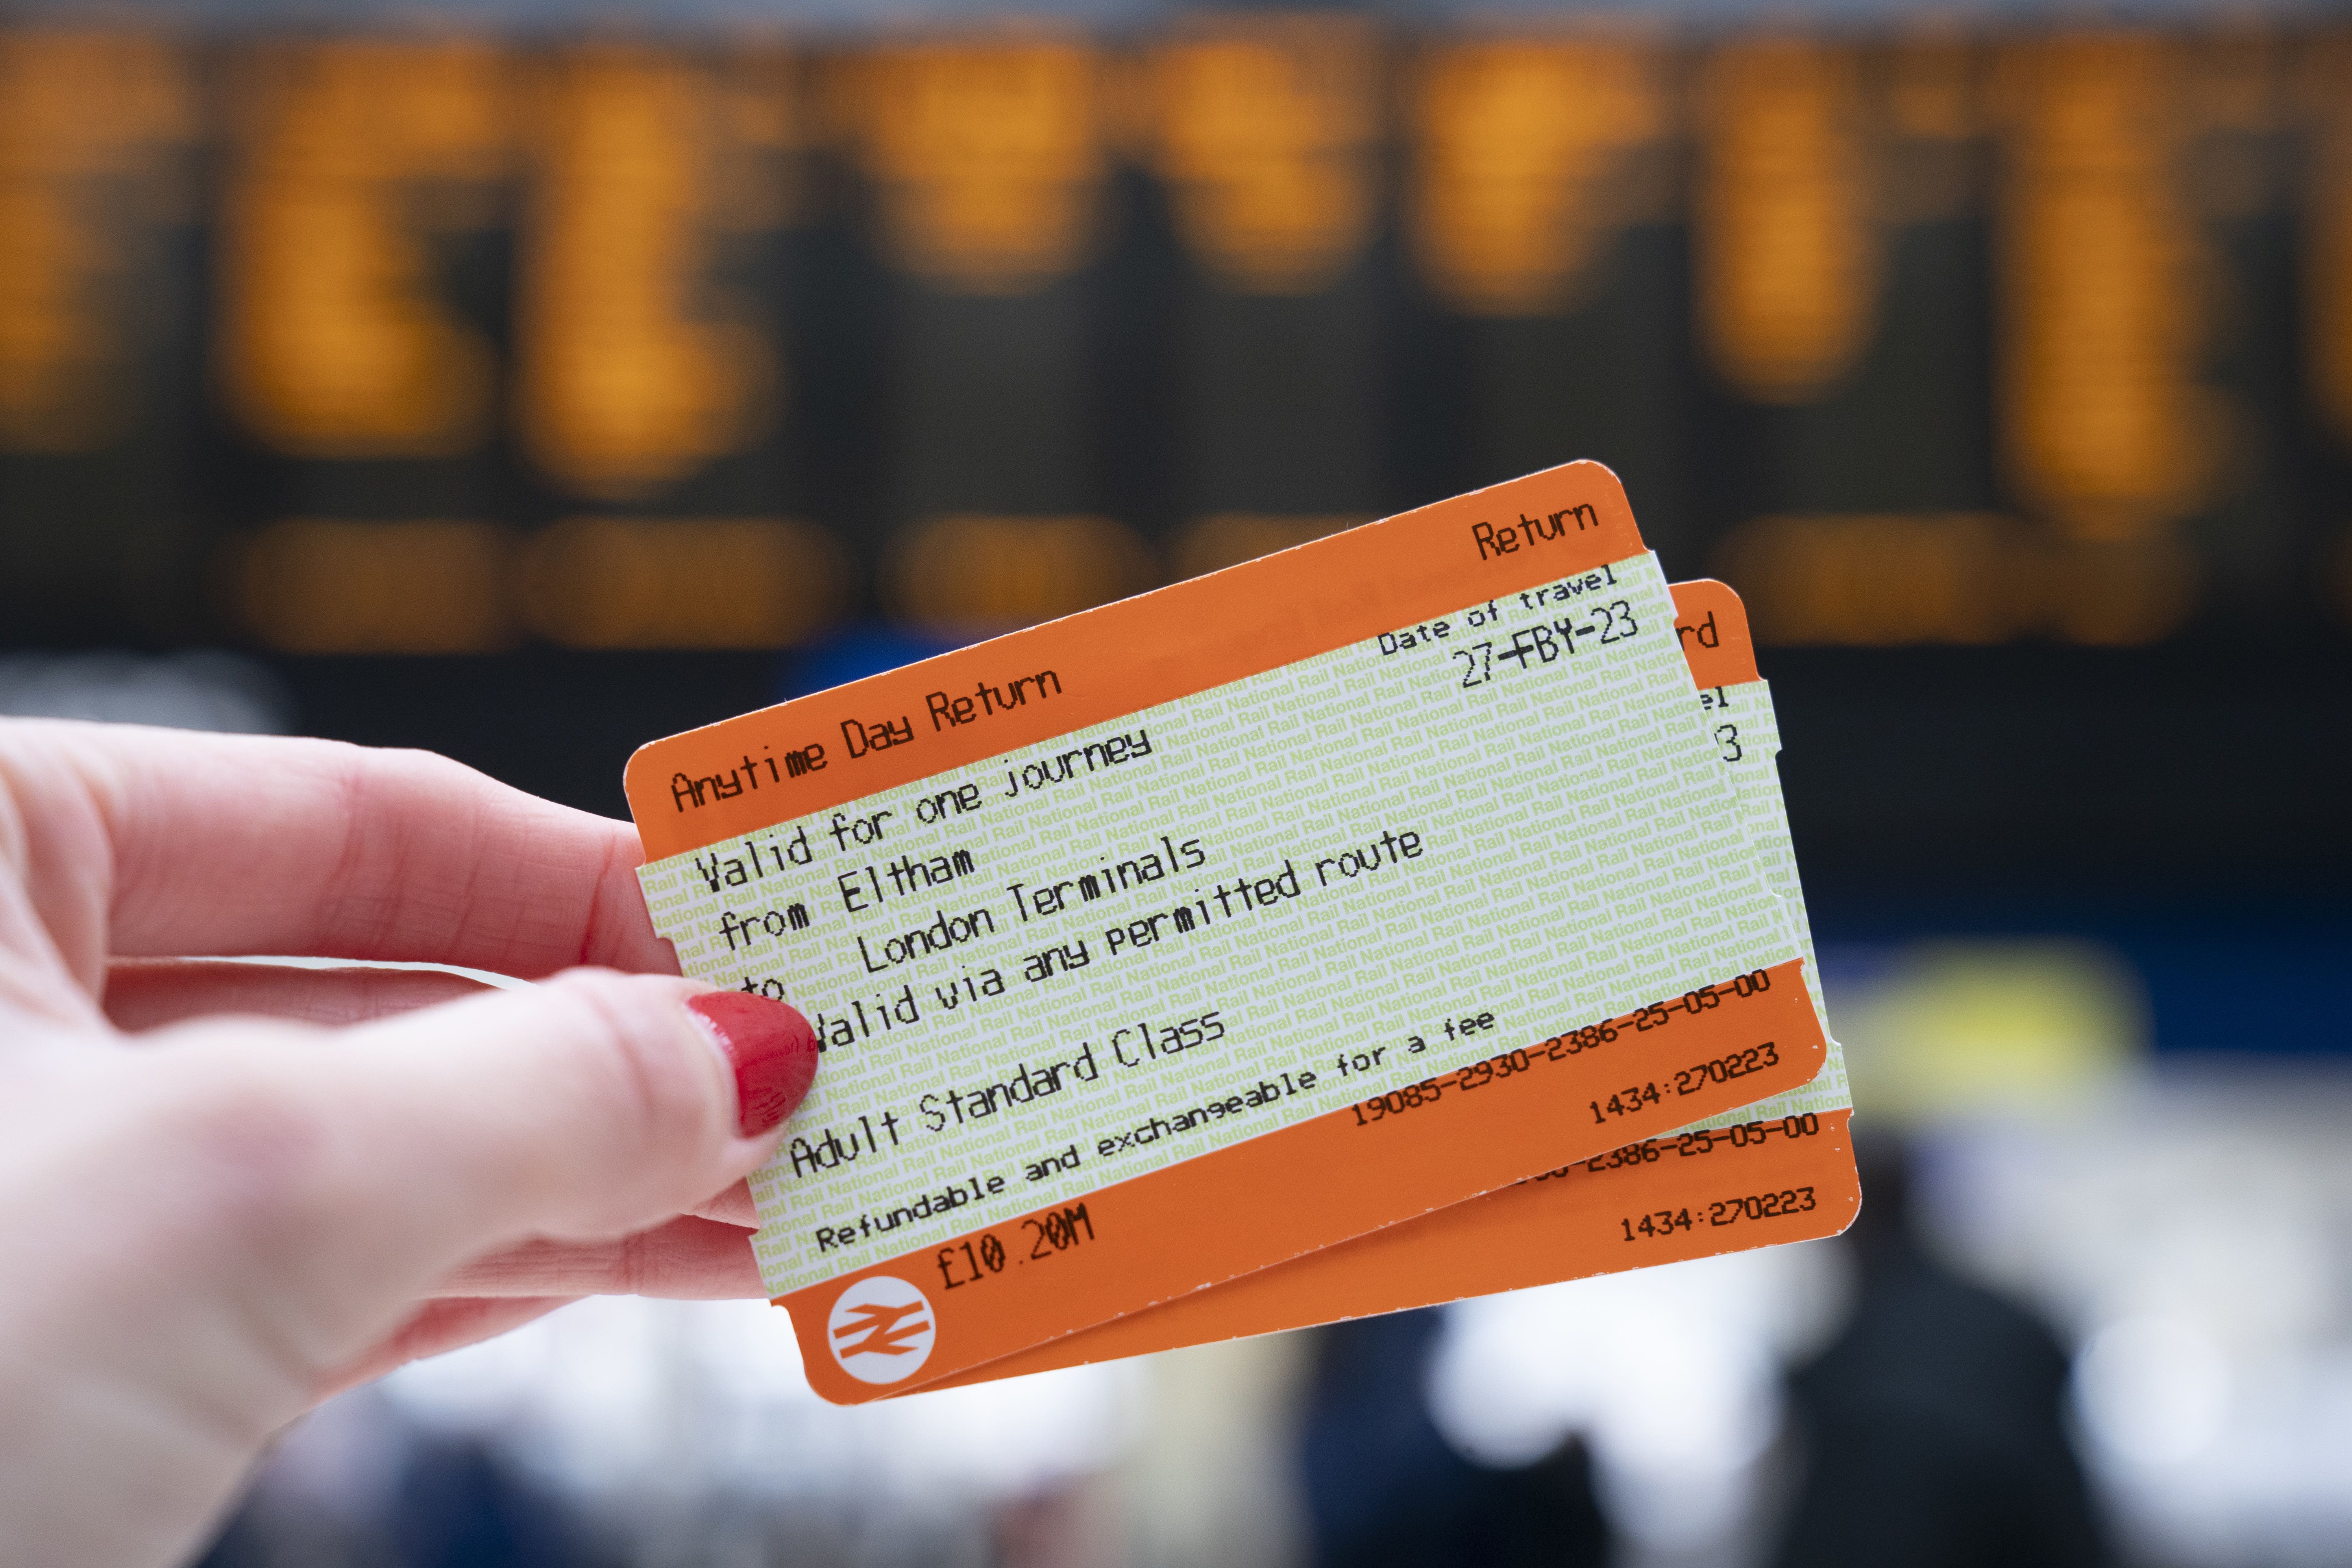 More than 600,000 people responded to the government’s consultation about closing railway ticket offices